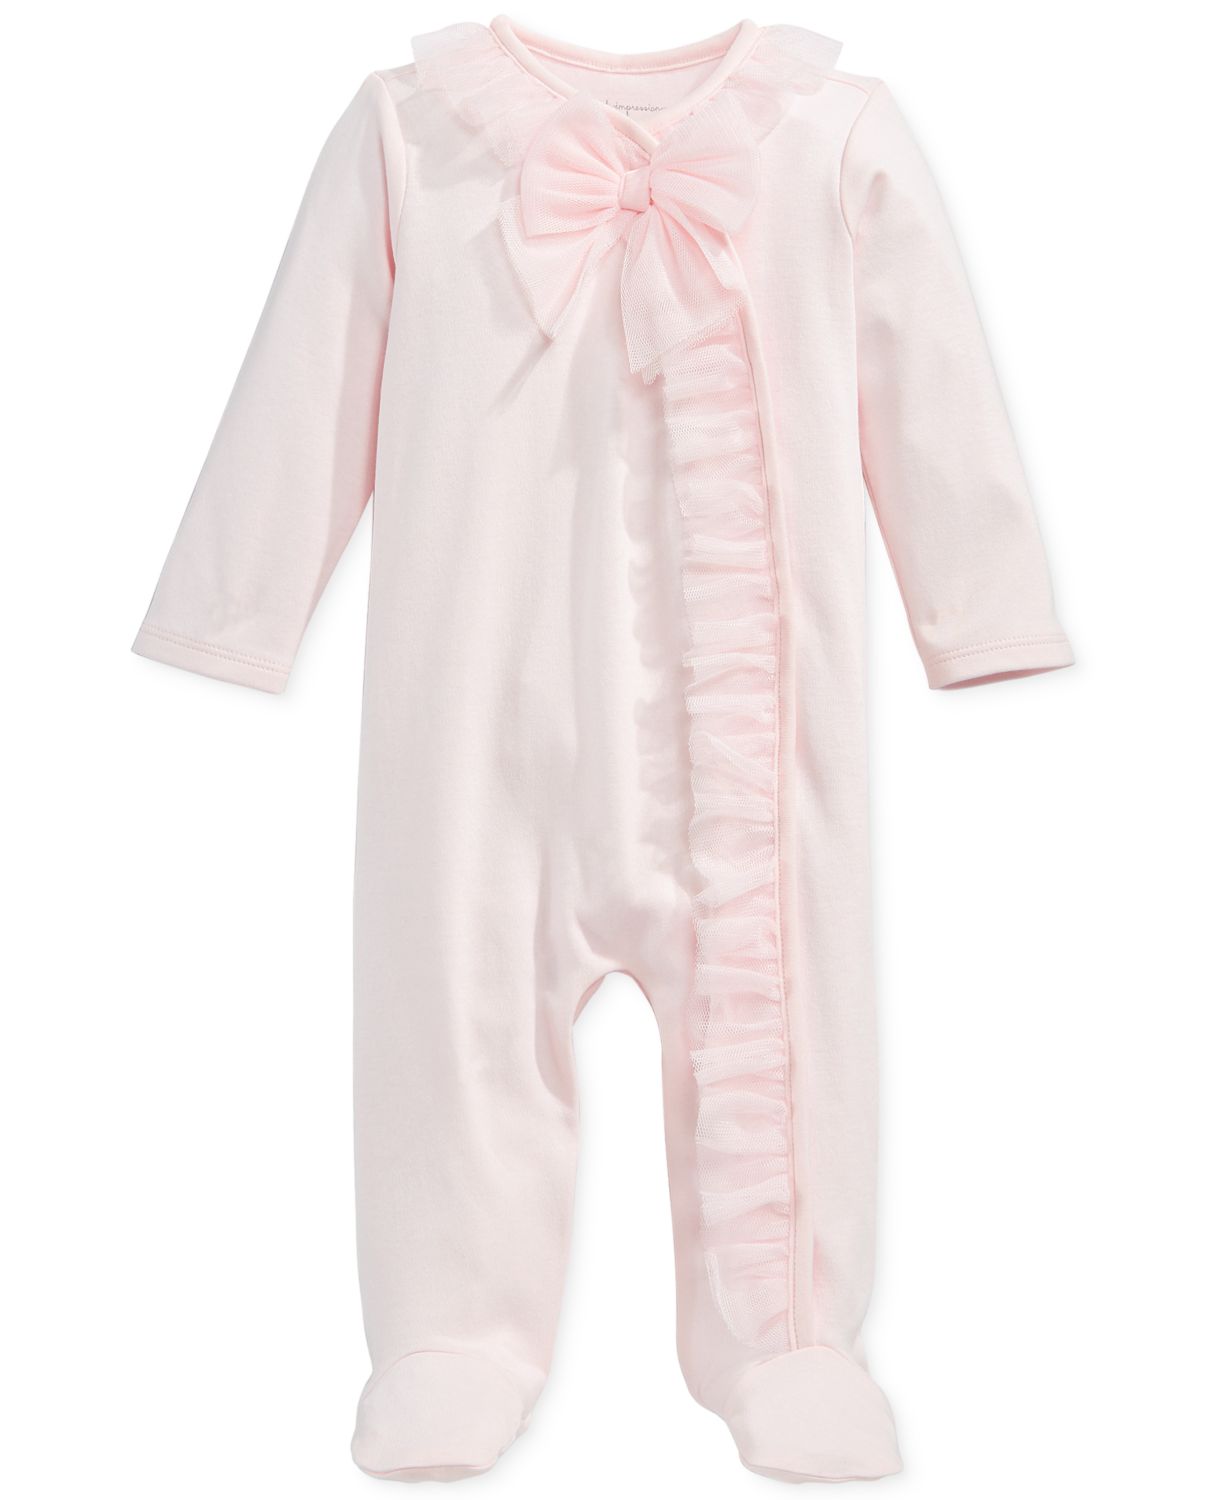 First Impressions Baby Girls Footed Tulle Coverall, Created for Macy's & Reviews - All Baby - Kids - Macy's